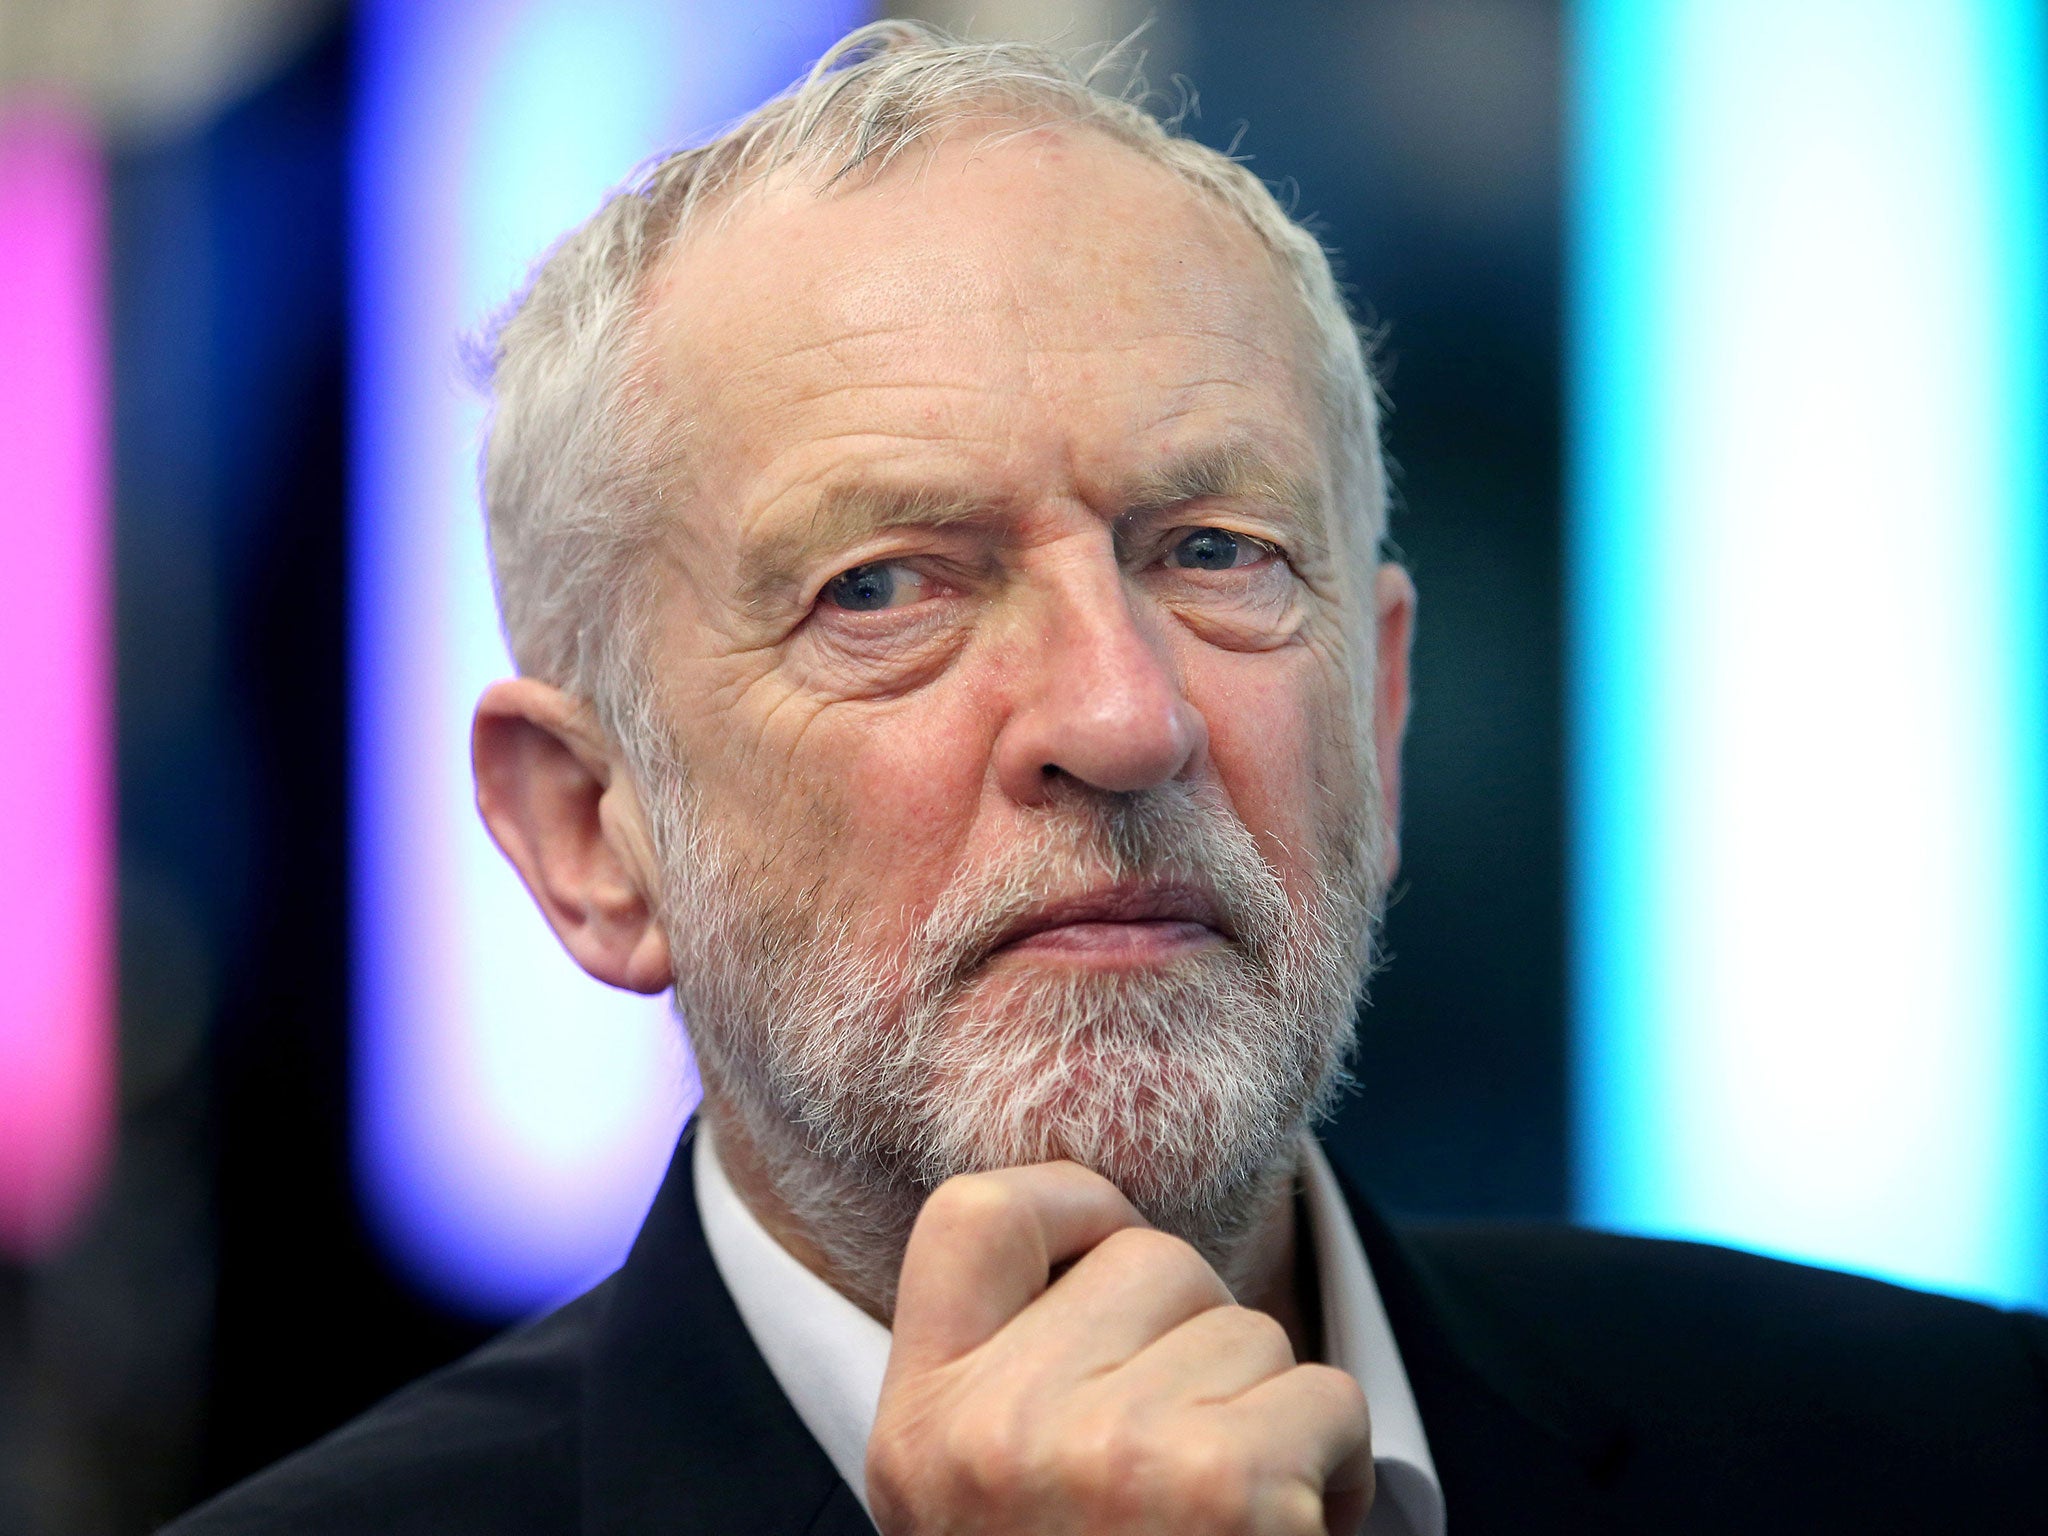 Jeremy Corbyn says the Labour party is taking action against antisemitism